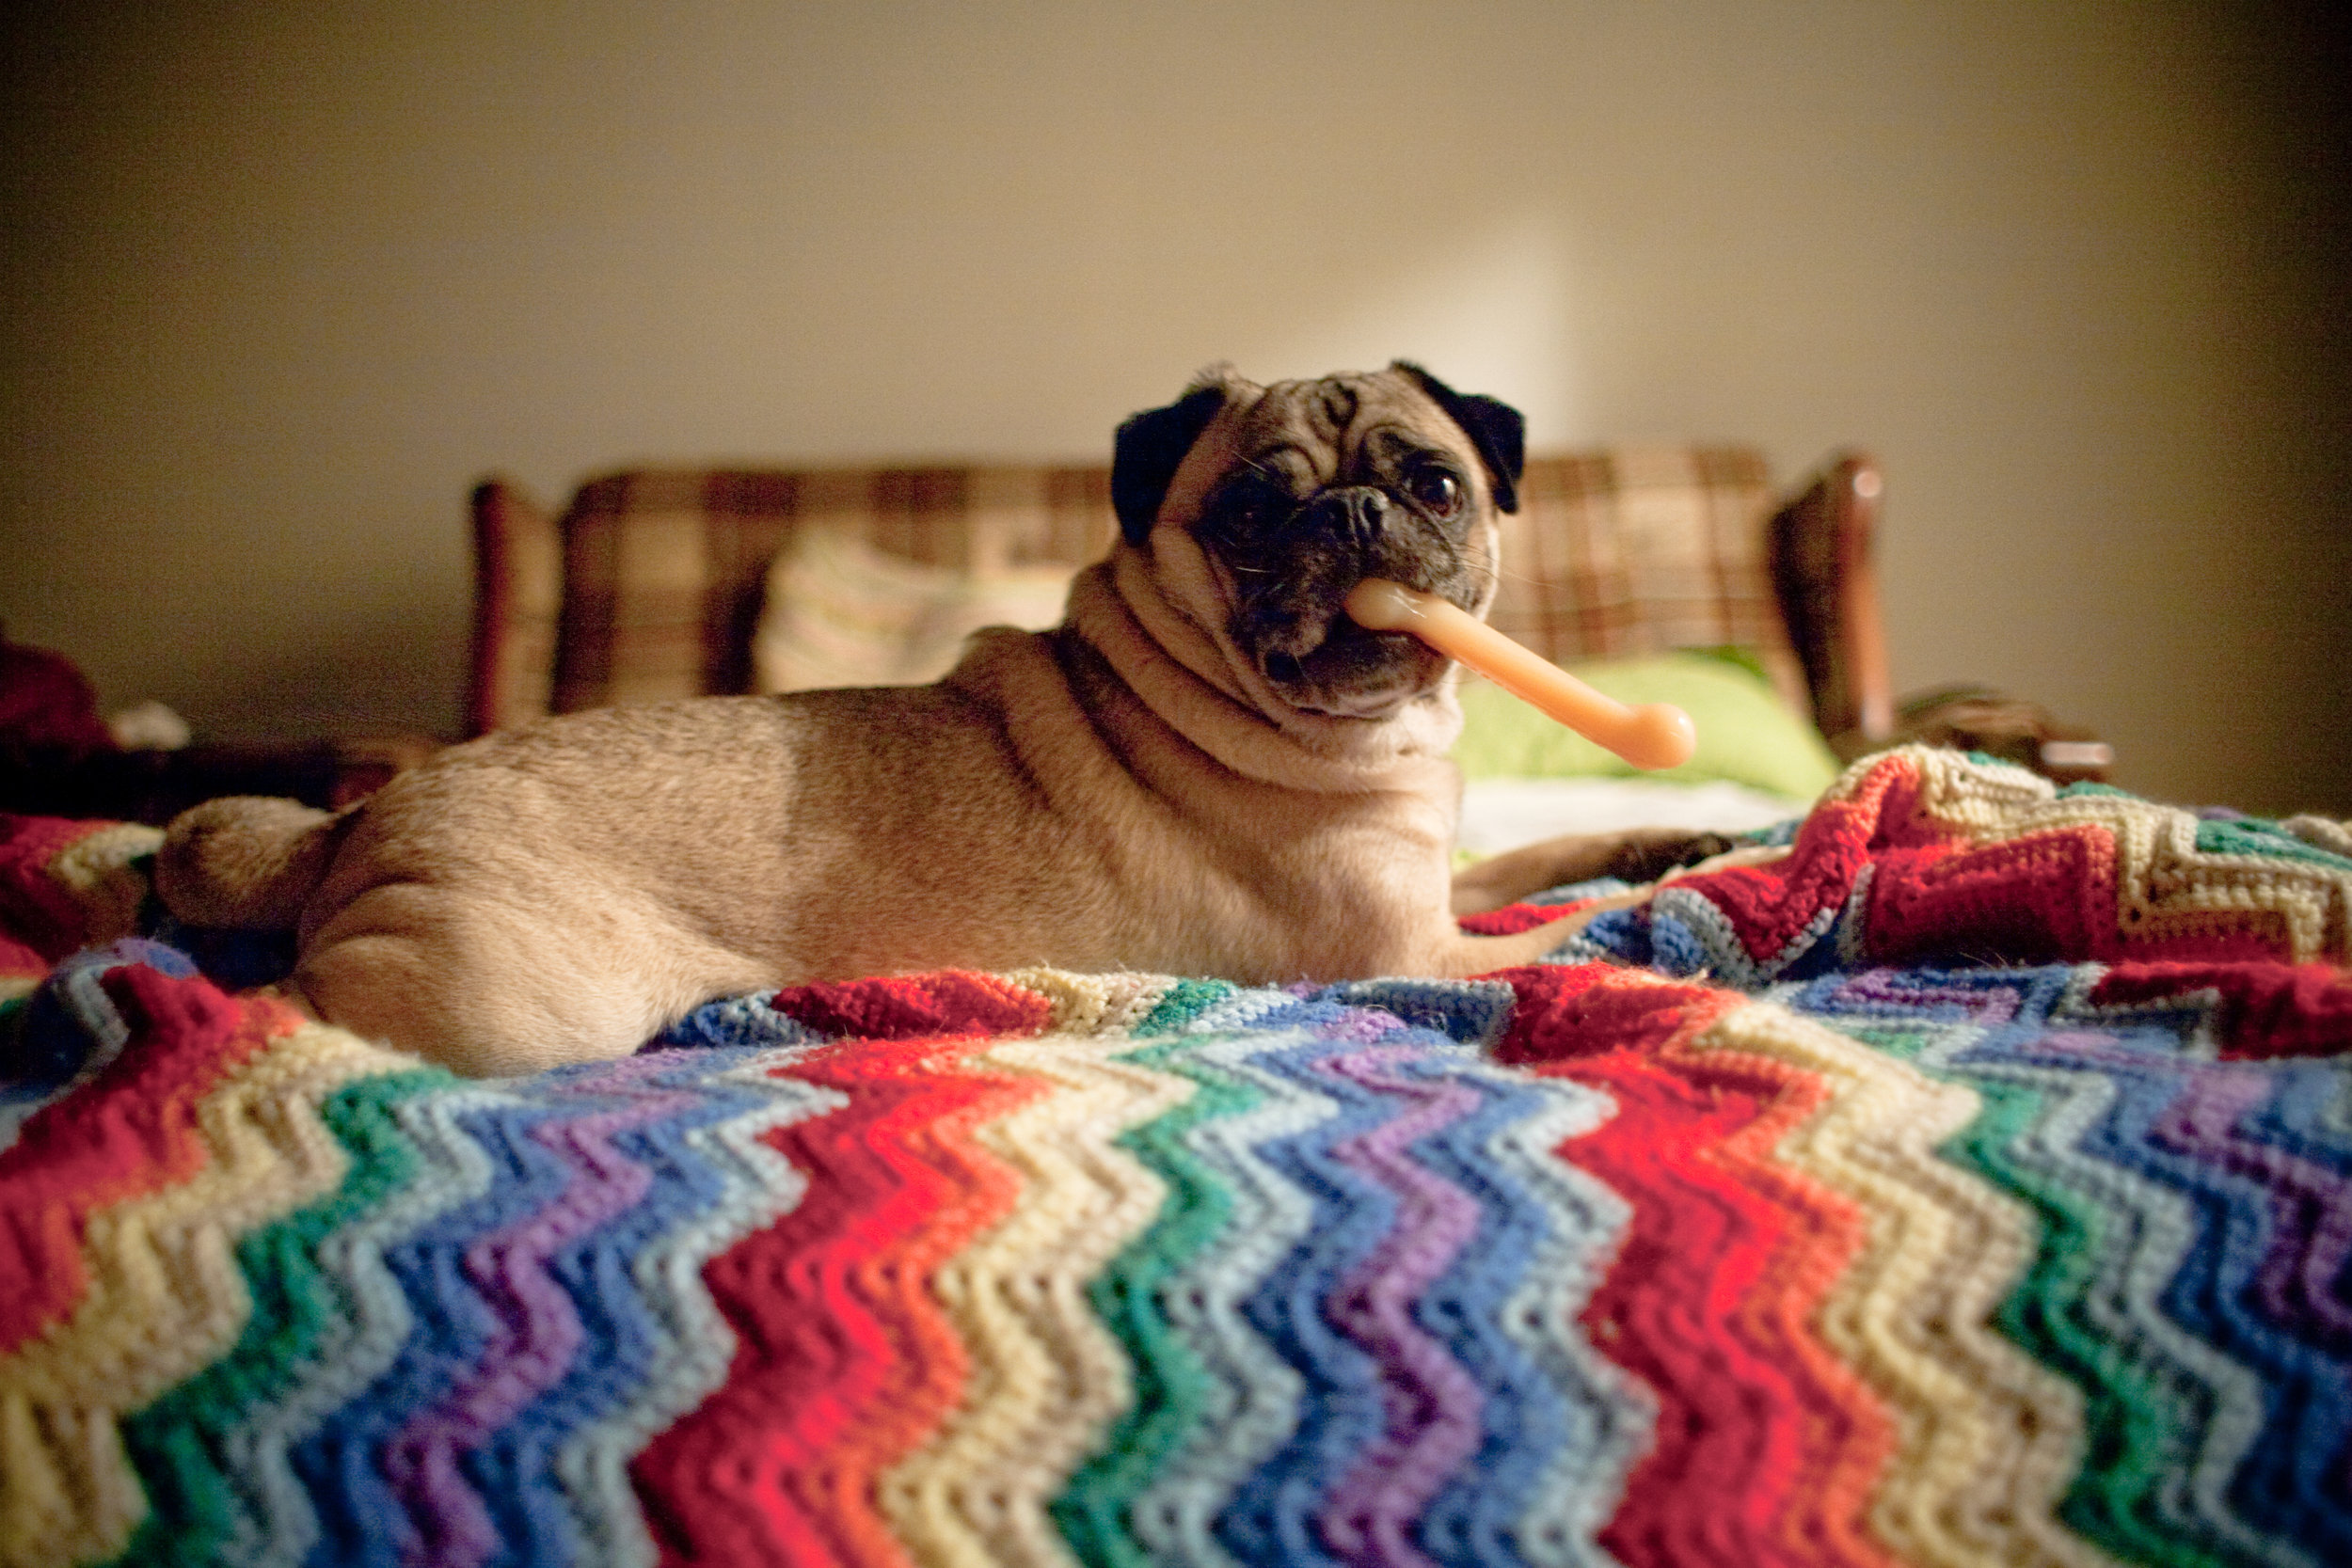 pug_on_rainbow_blanket_holding_bone_in_mouth_funny_photo